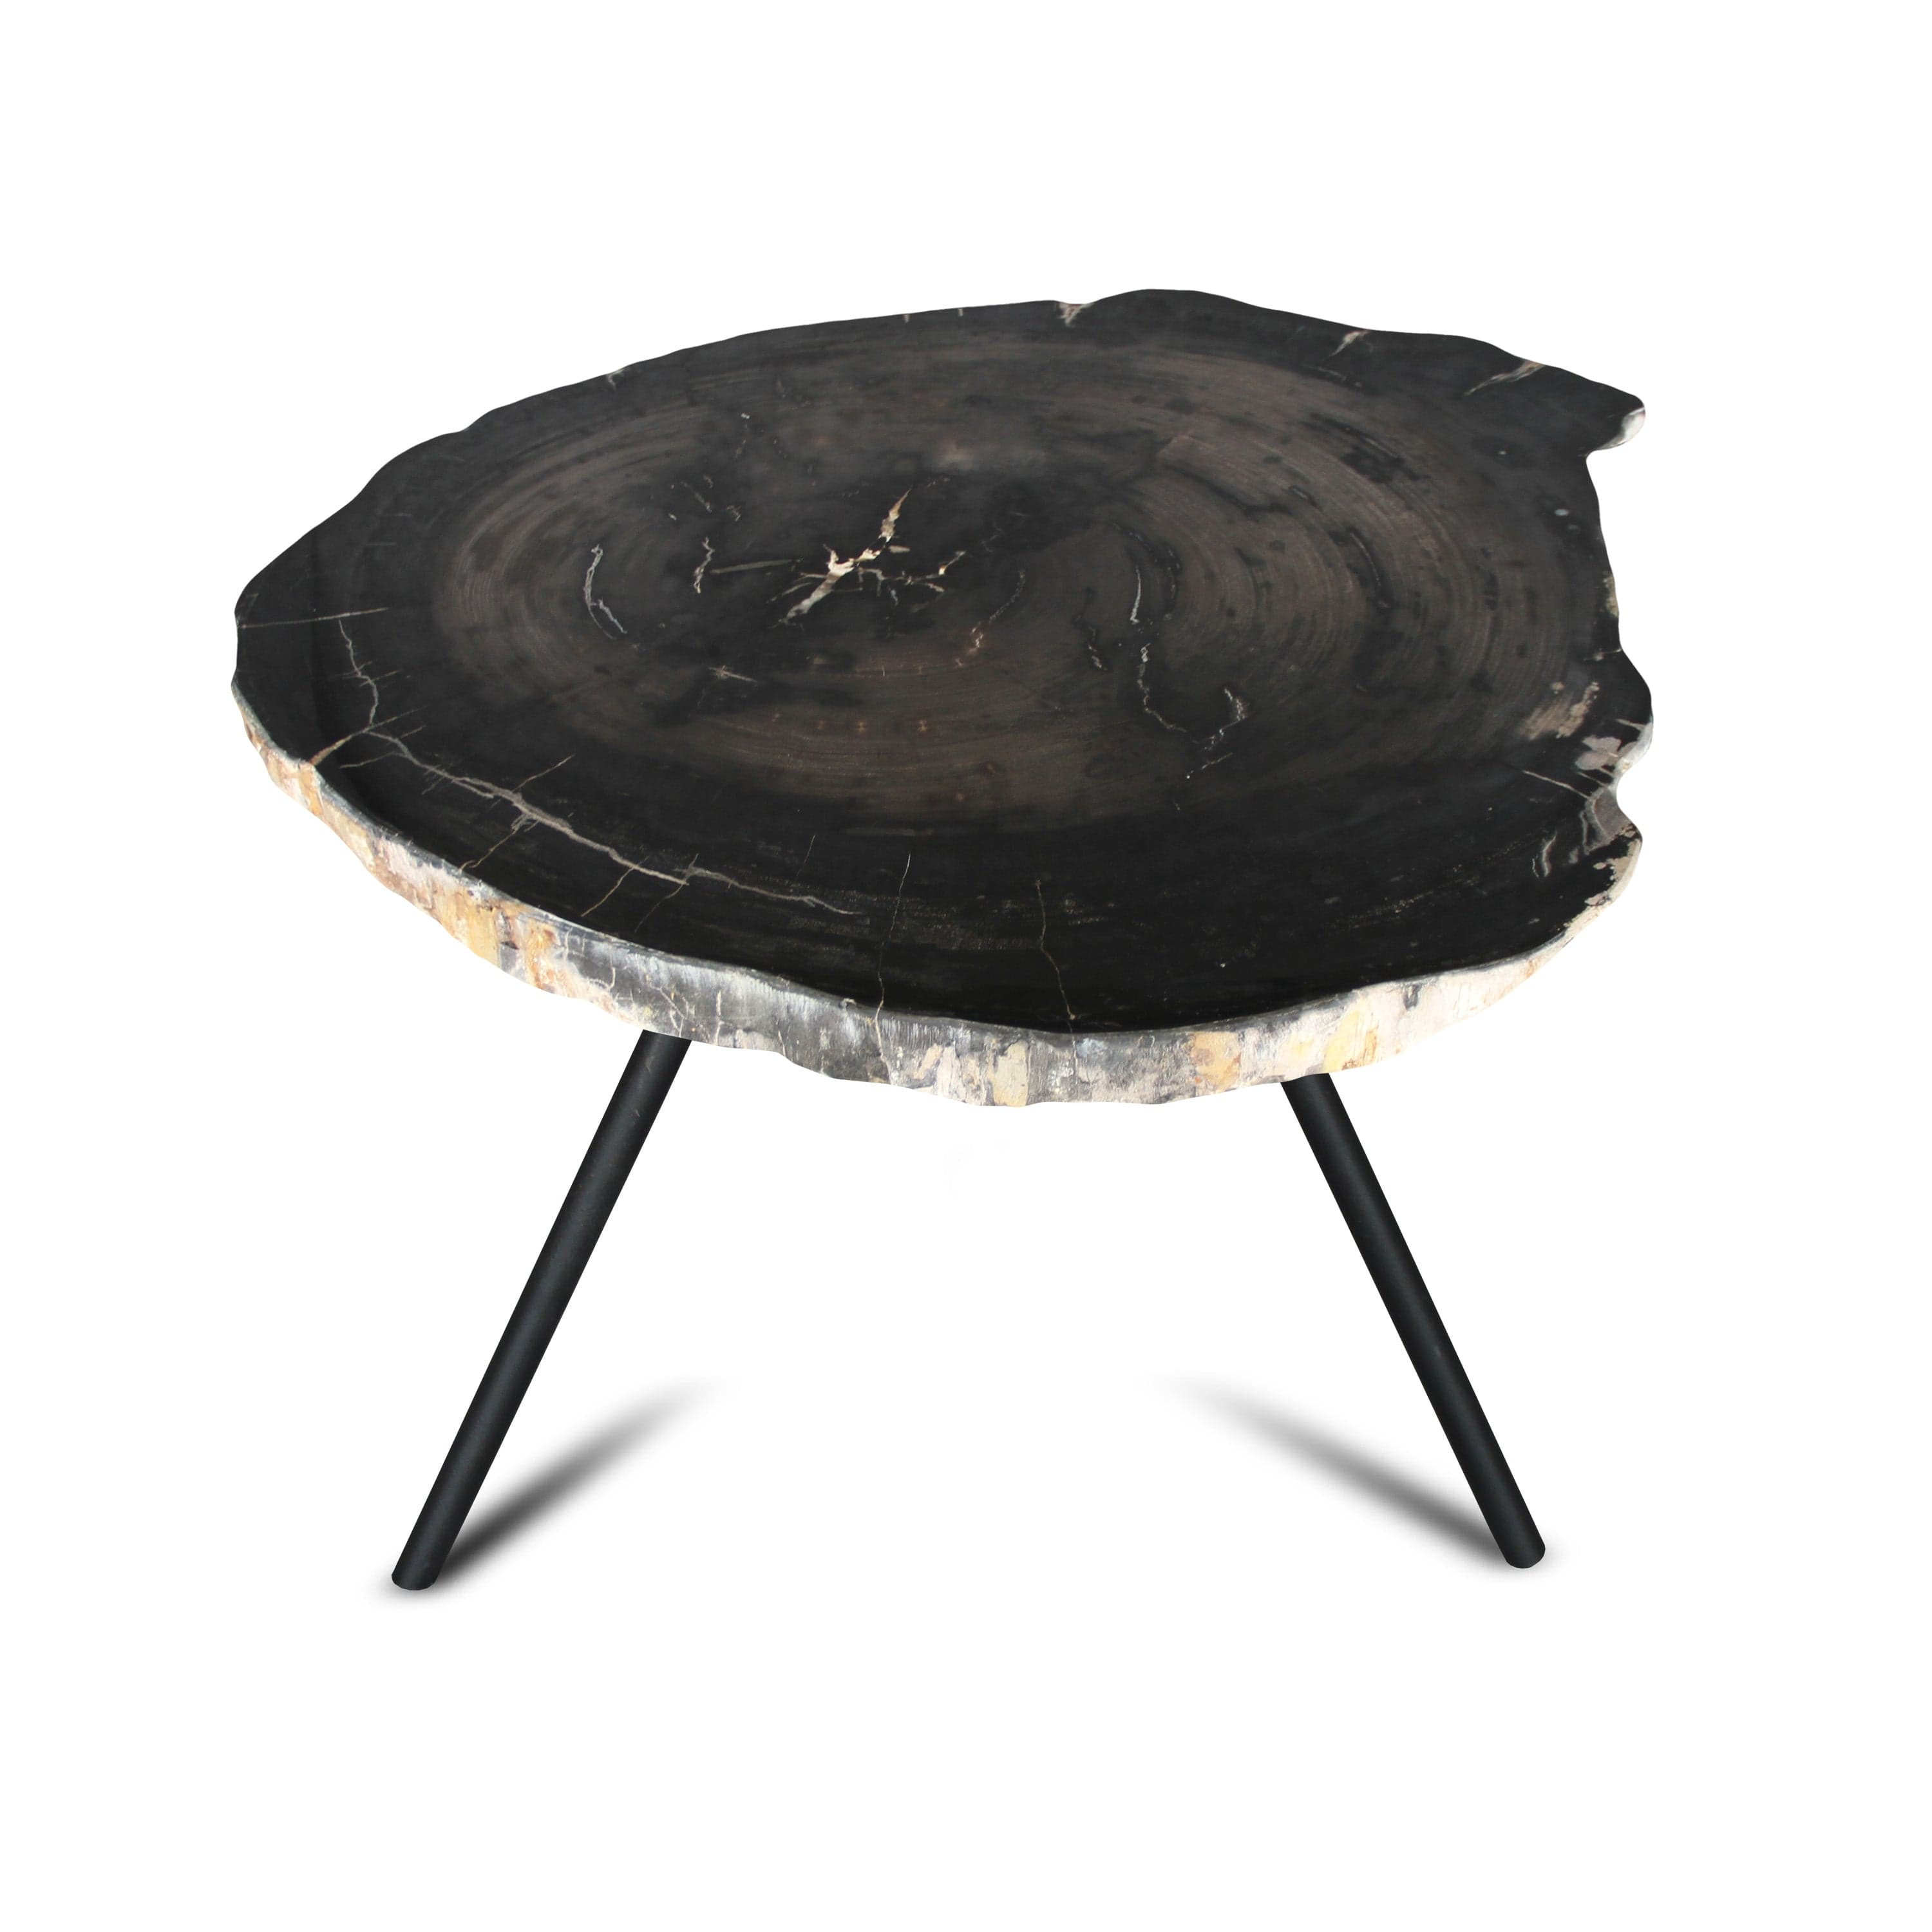 Kalifano Petrified Wood Petrified Wood Round Slice Side Table from Indonesia - 28" / 64 lbs PWT2400.003